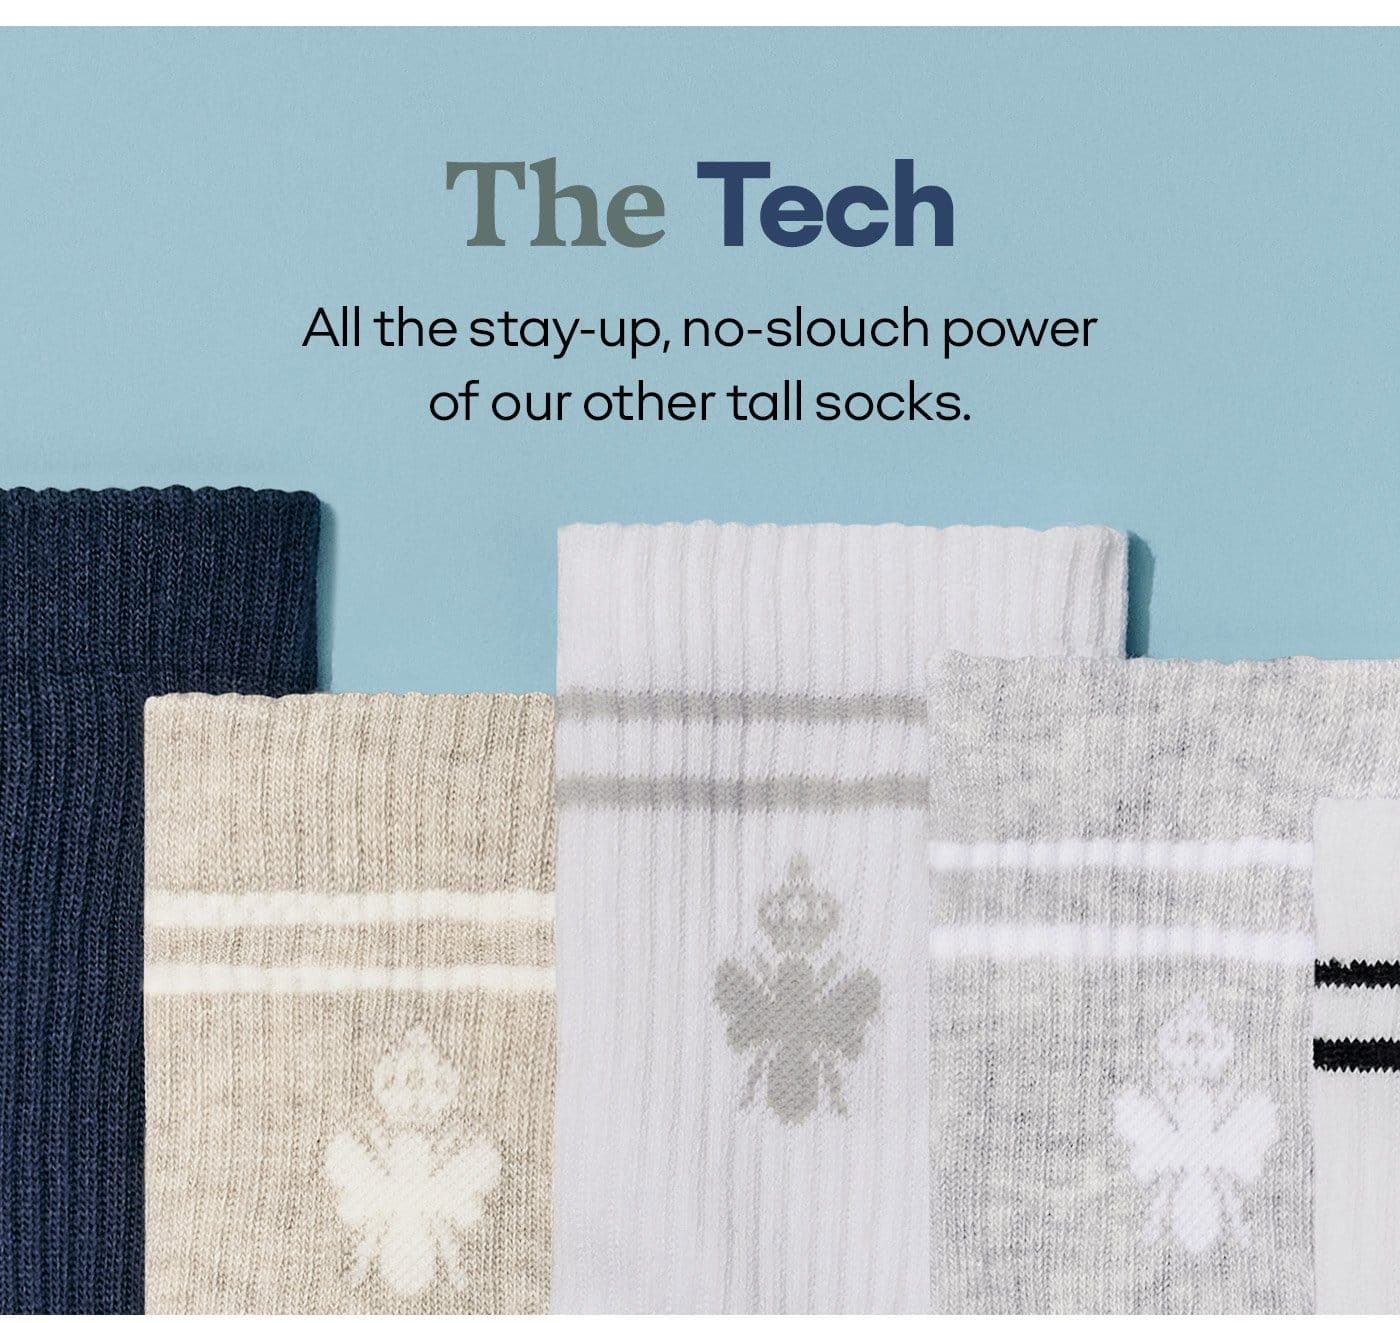 The Tech All the stay-up, no-slouch power of our other tall socks.